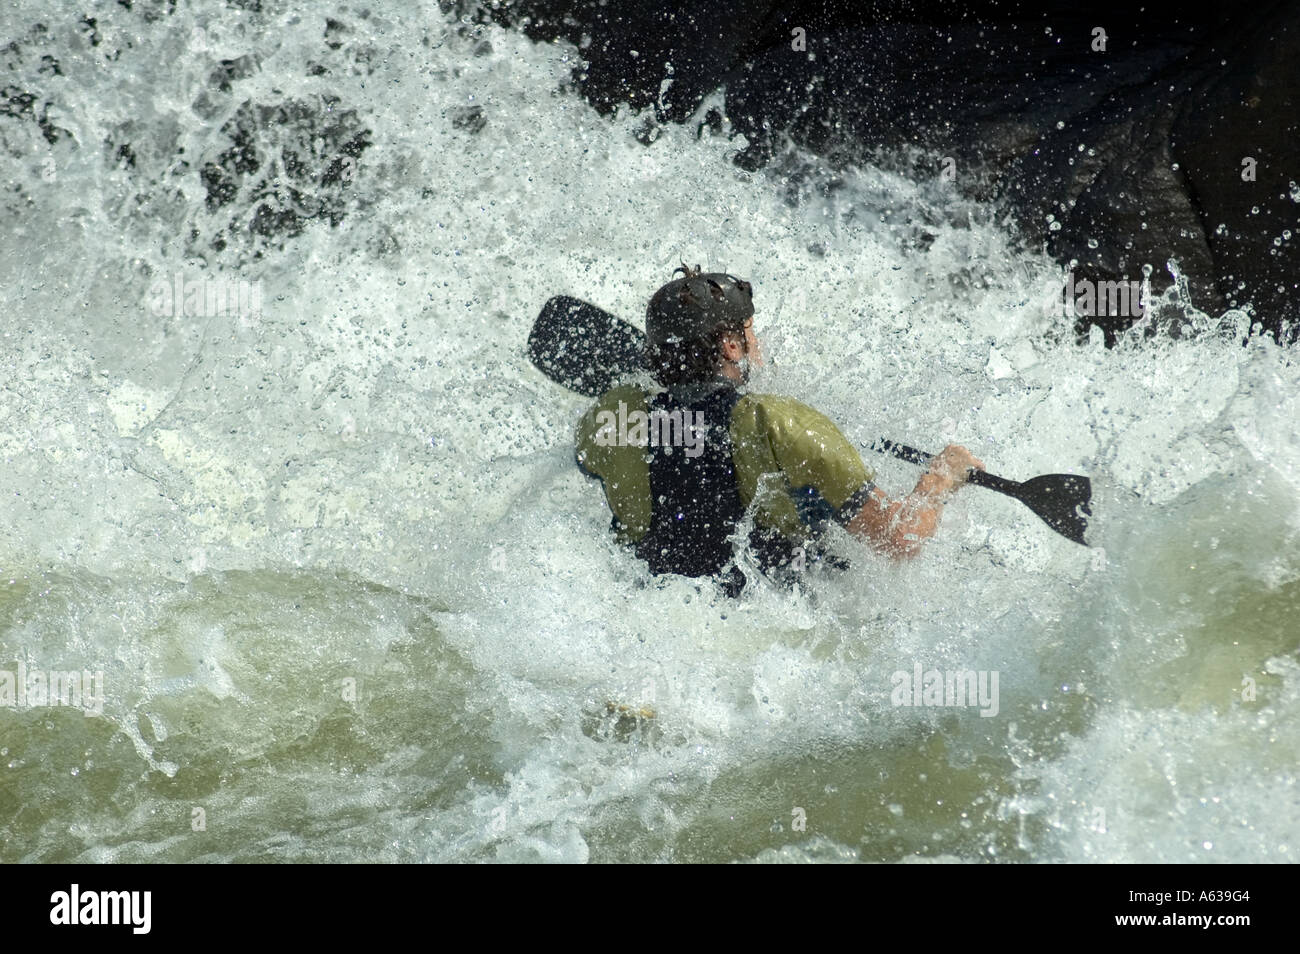 Watersports At Pillow Rock On The Gauley River In West Virginia